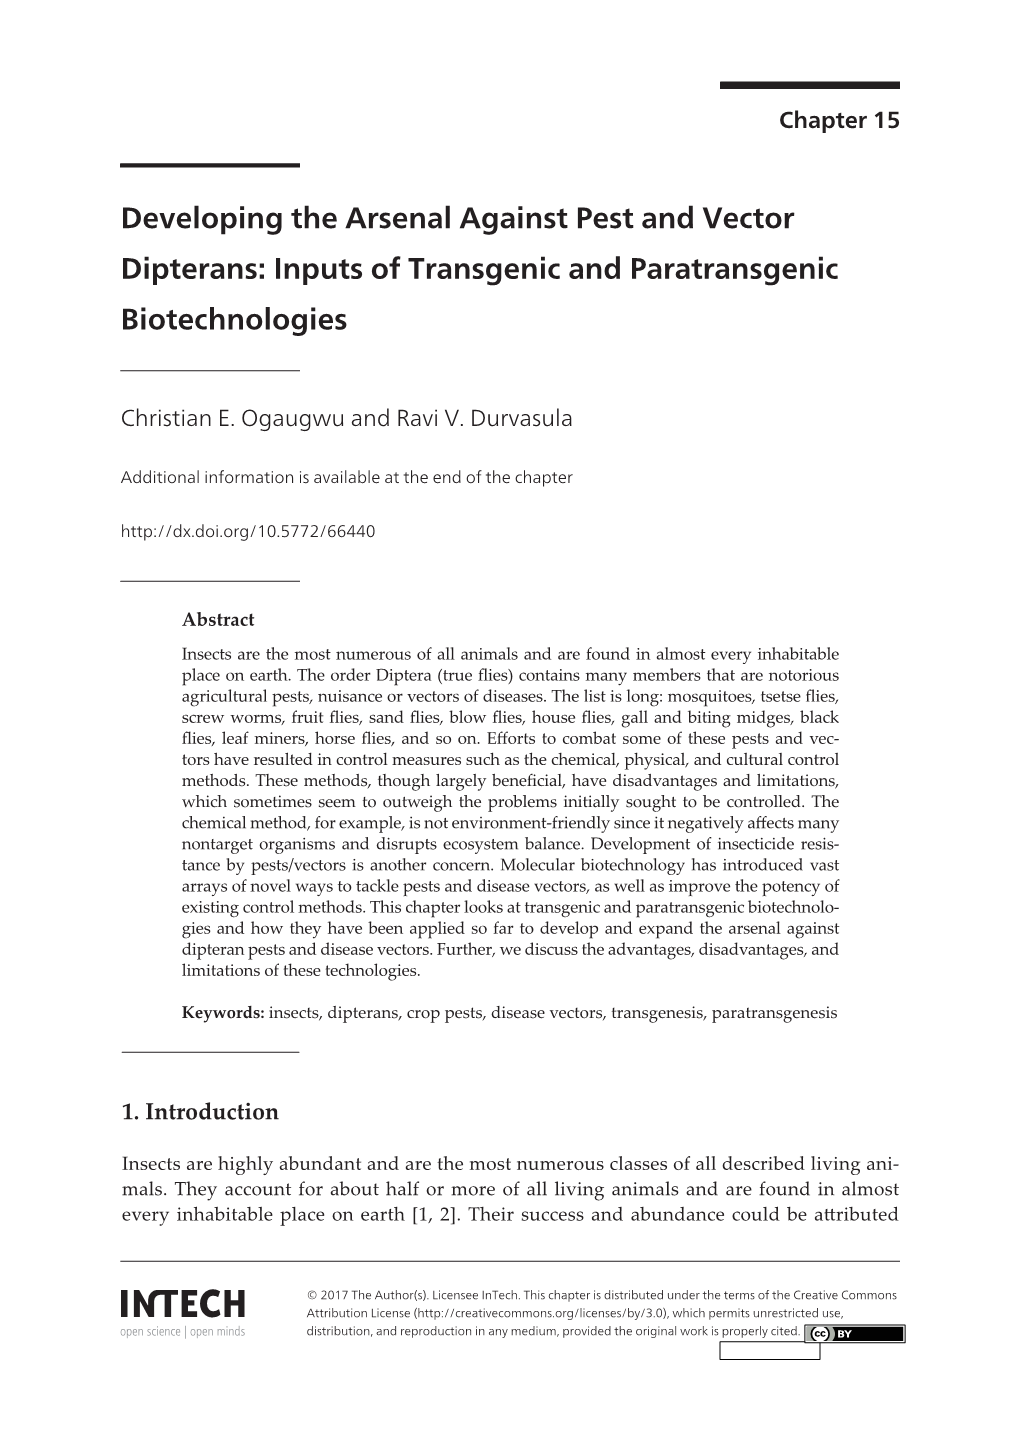 Developing the Arsenal Against Pest and Vector Dipterans: Inputs of Transgenic and Paratransgenic Biotechnologies